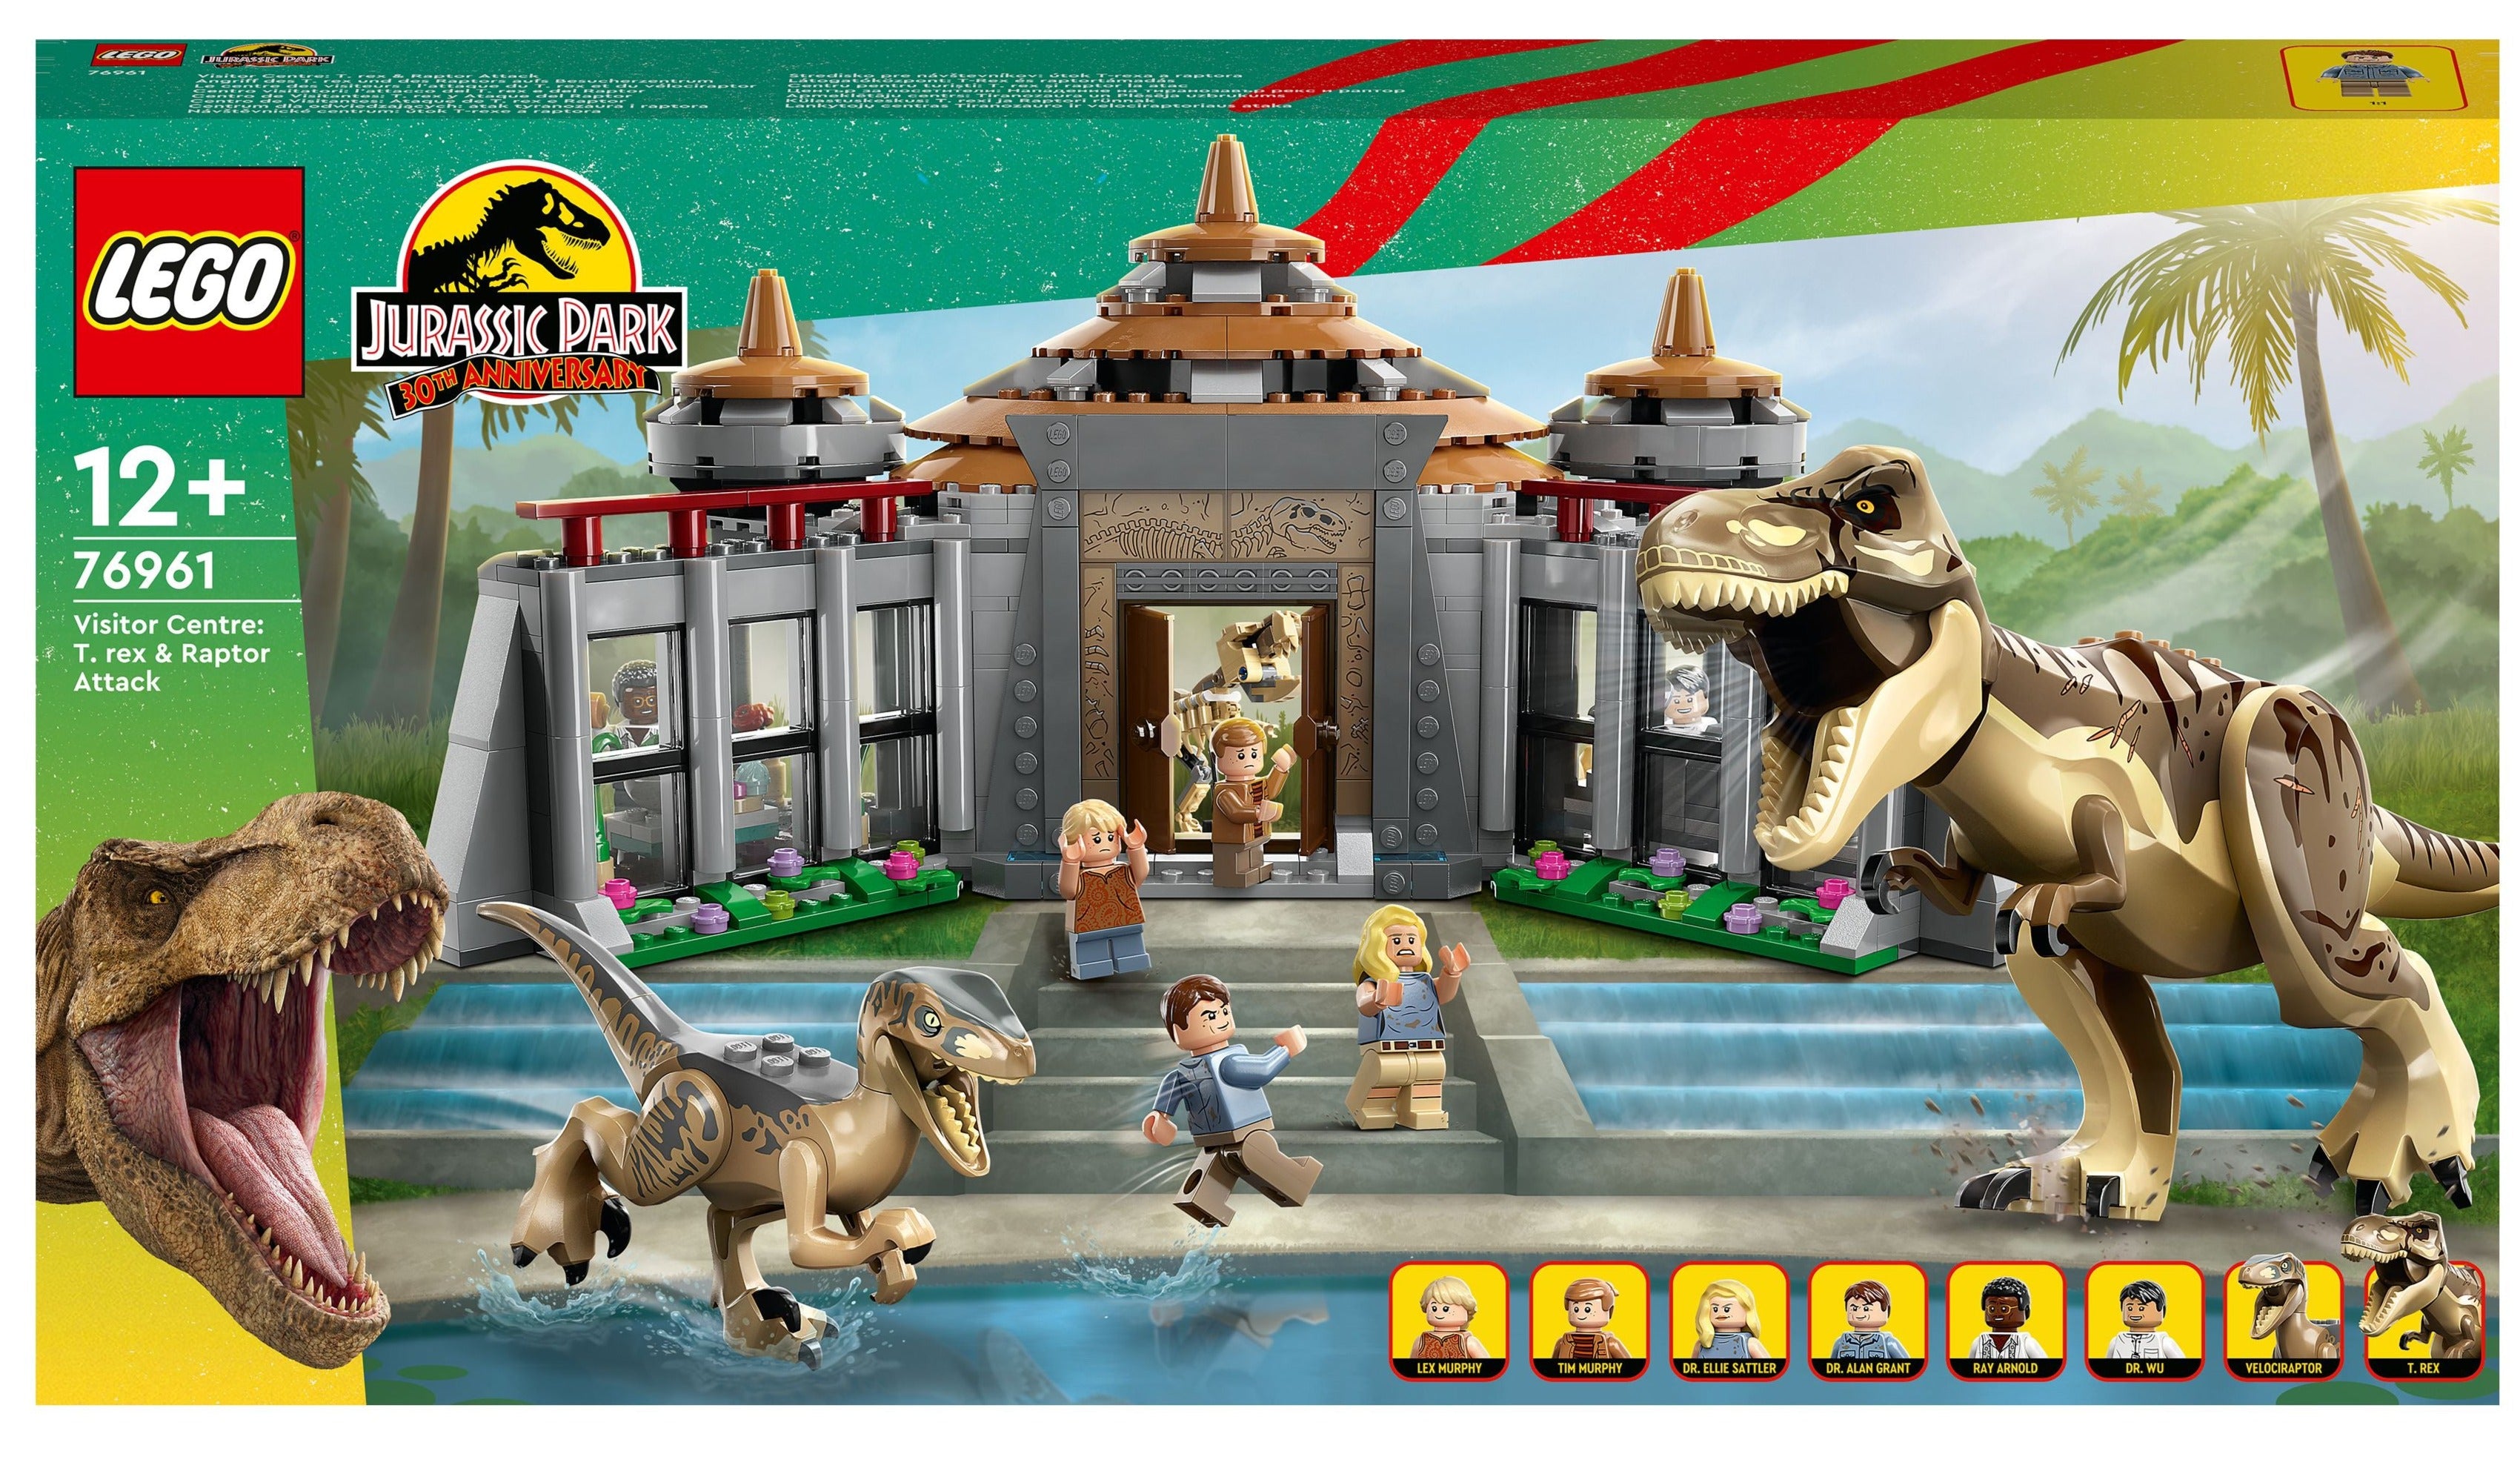 LEGO Jurassic Park Velociraptor Escape 76957 Learn to Build Dinosaur Toy  for boys and girls, Gift for Kids Aged 4 and Up Featuring a Buildable